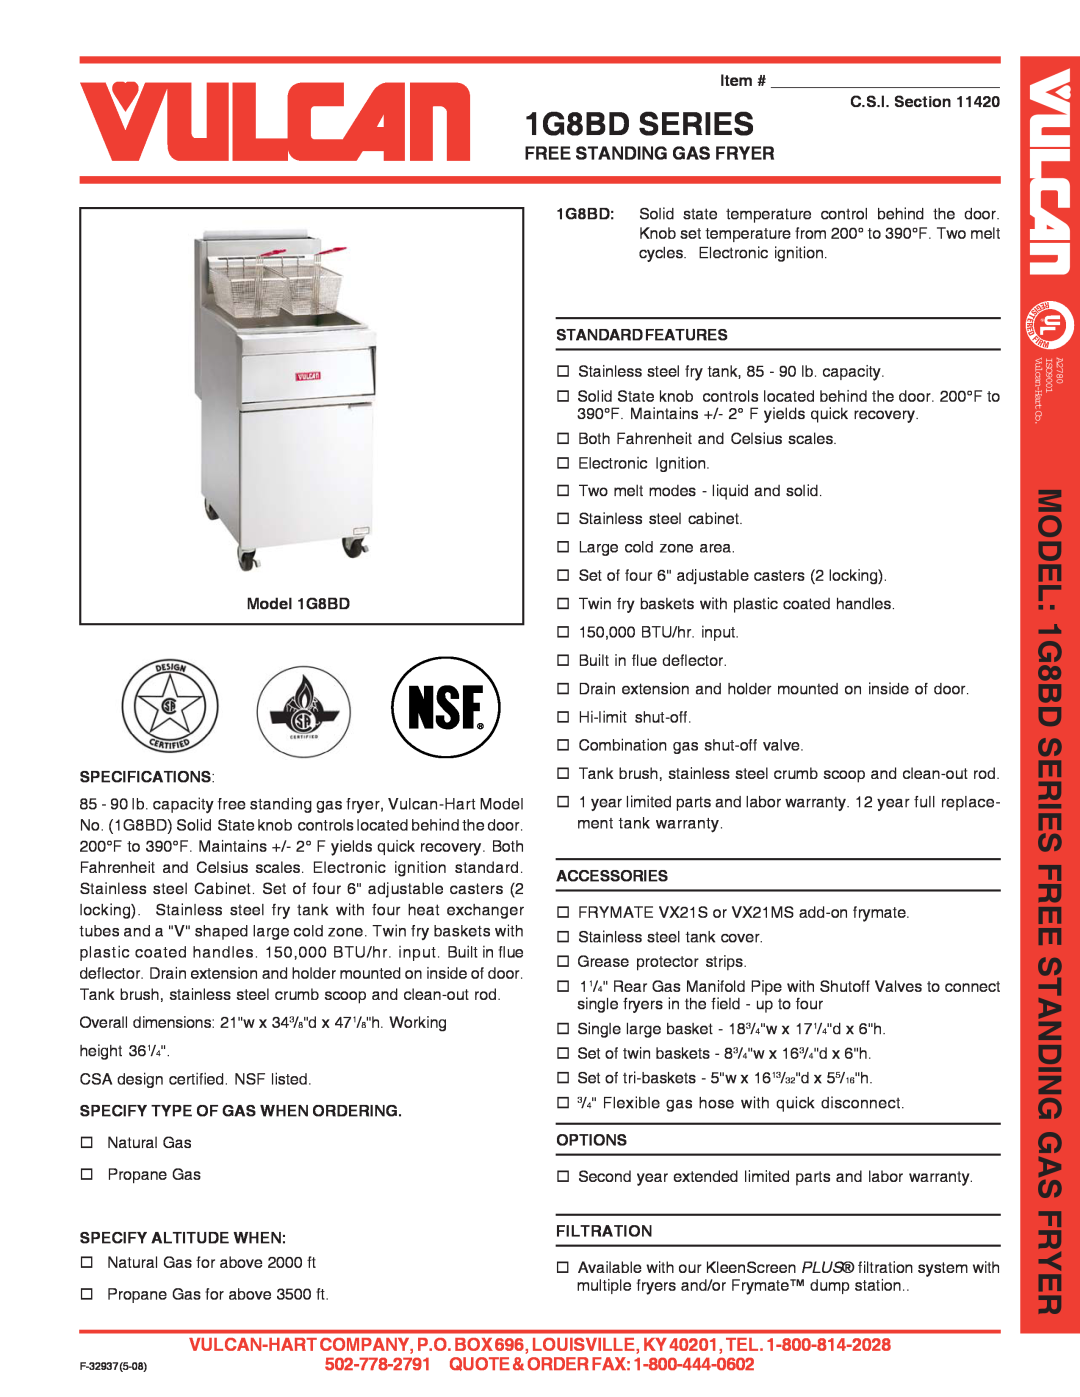 Vulcan-Hart specifications 1G8BD SERIES, Free Standing Gas Fryer, Item #, C.S.I. Section, Model 1G8BD SPECIFICATIONS 